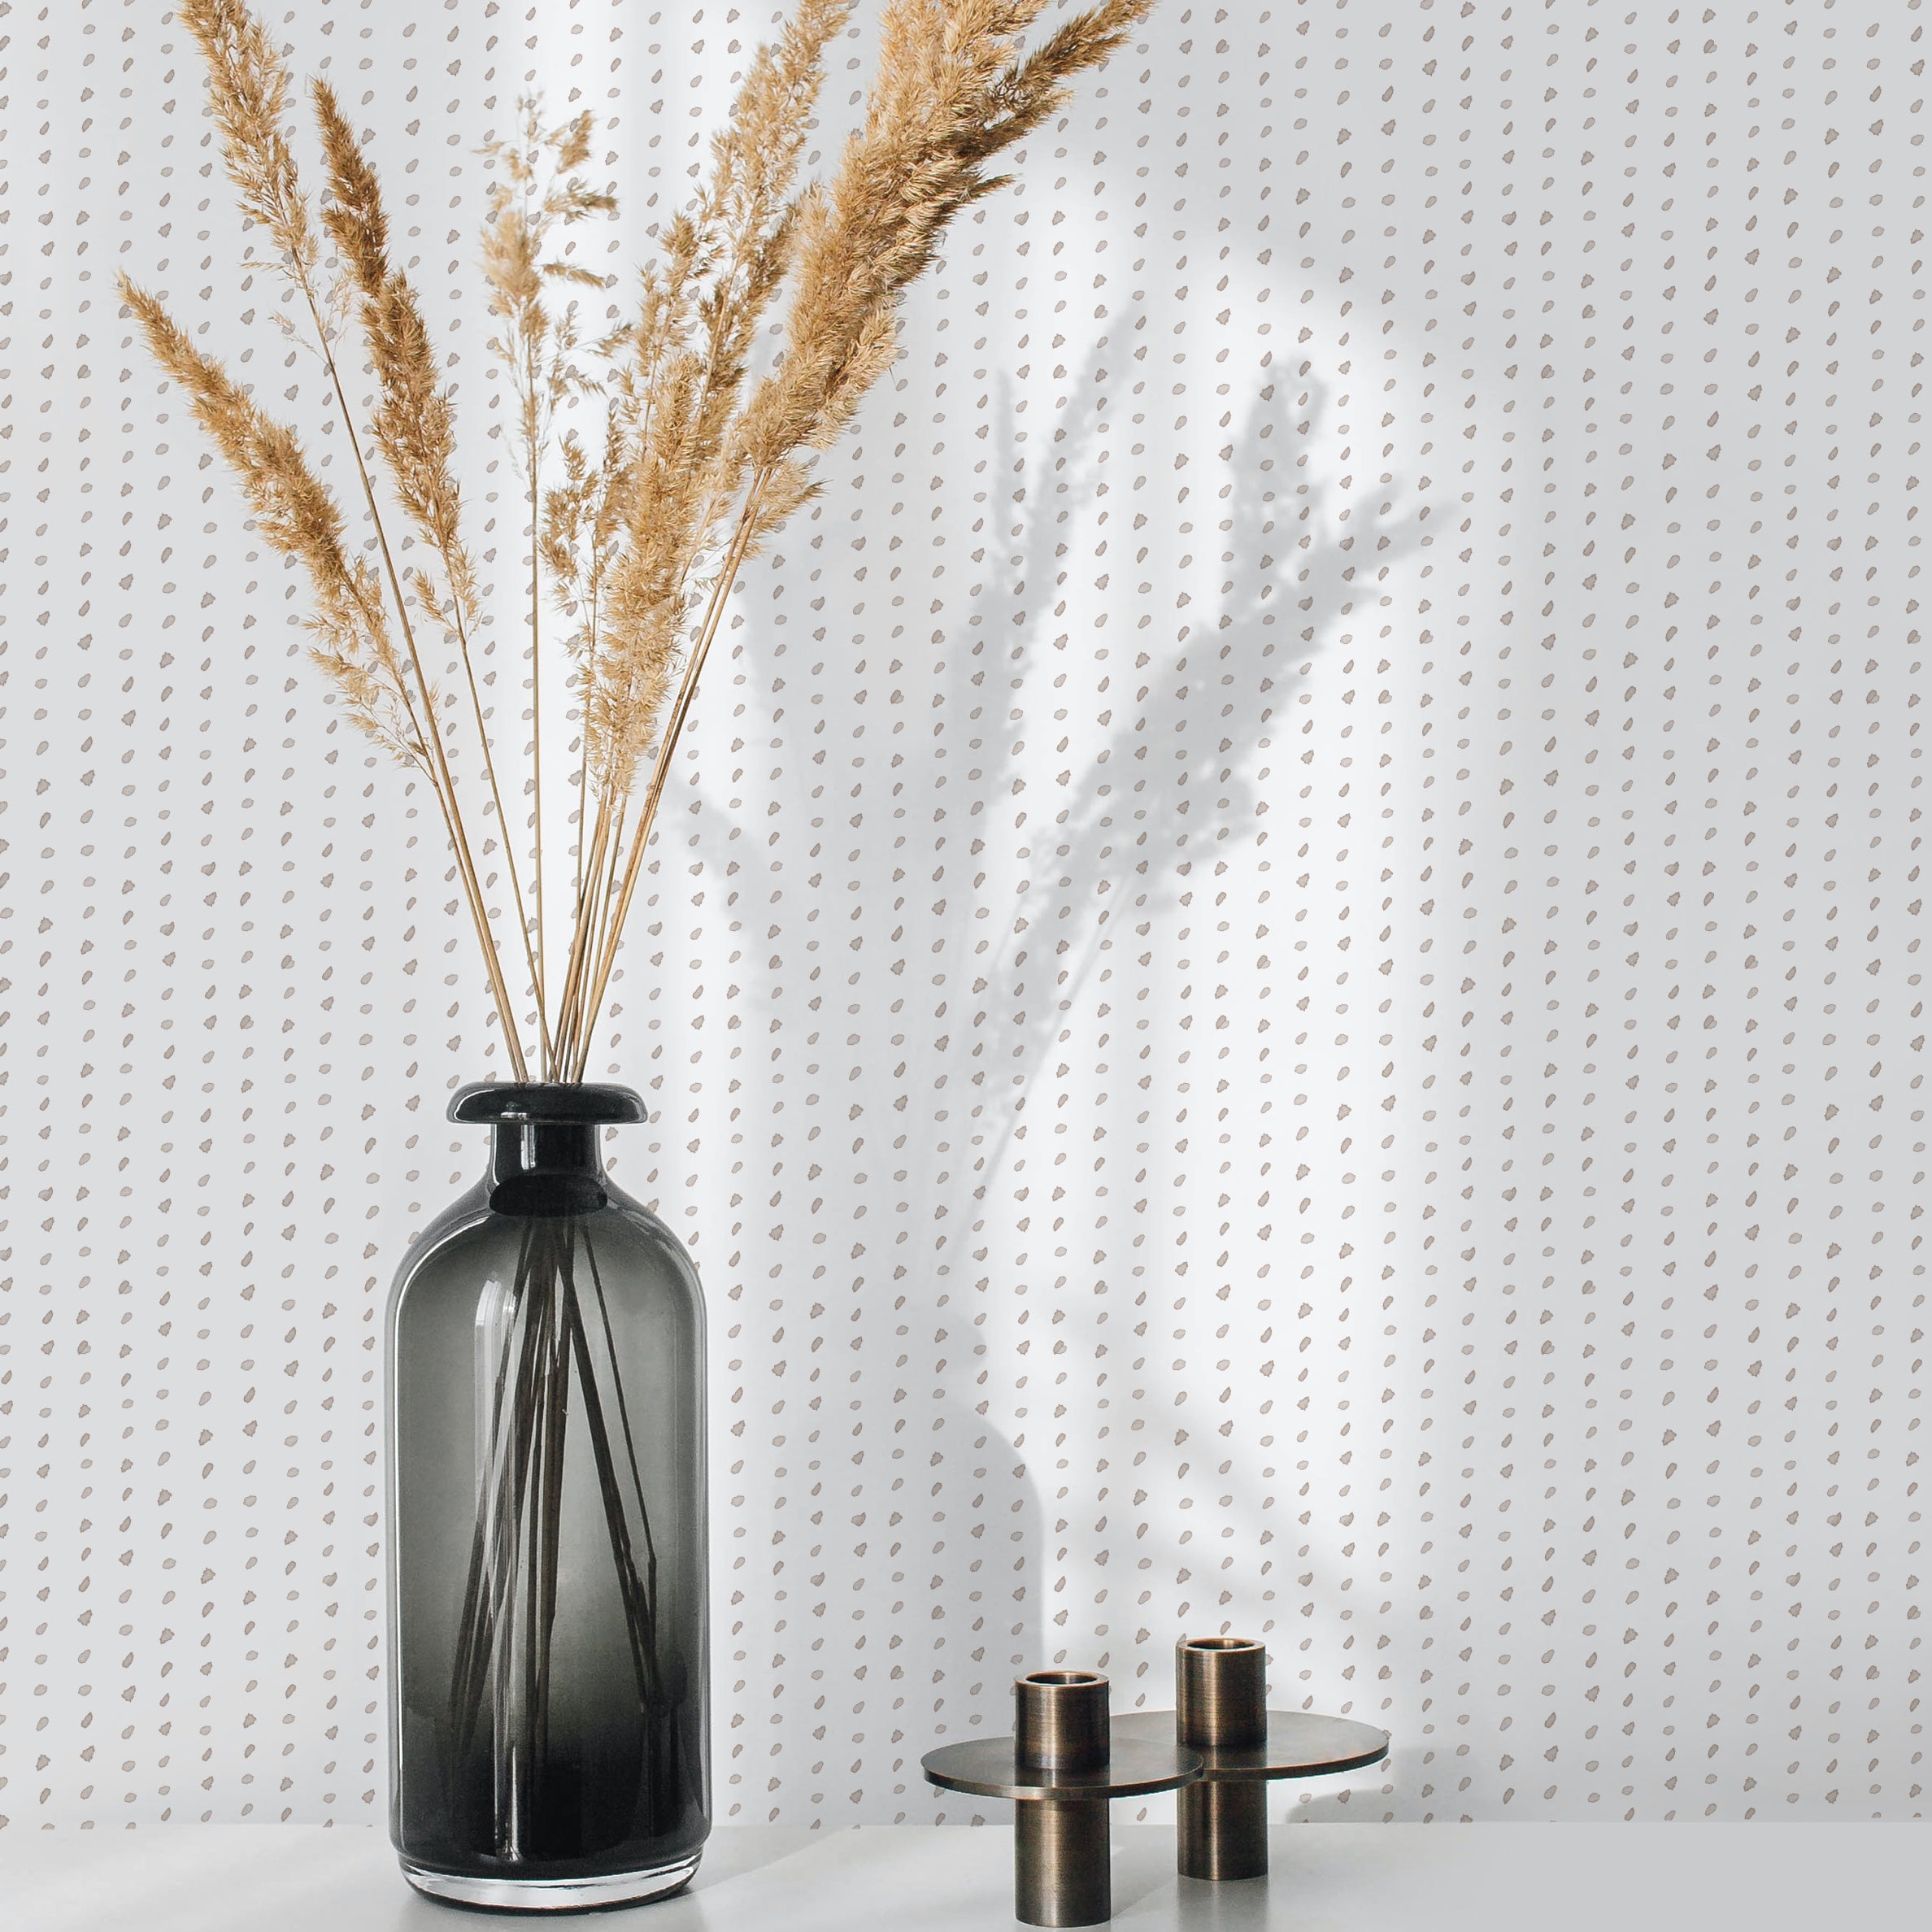 A square image showing a room vignette with a section of wall covered in a minimal watercolor wallpaper. The design comprises tiny, dark teardrop shapes set against a clean white backdrop. A sleek black vase with tall, dried beige grasses and a small brass candle holder set add a sophisticated touch to the scene.